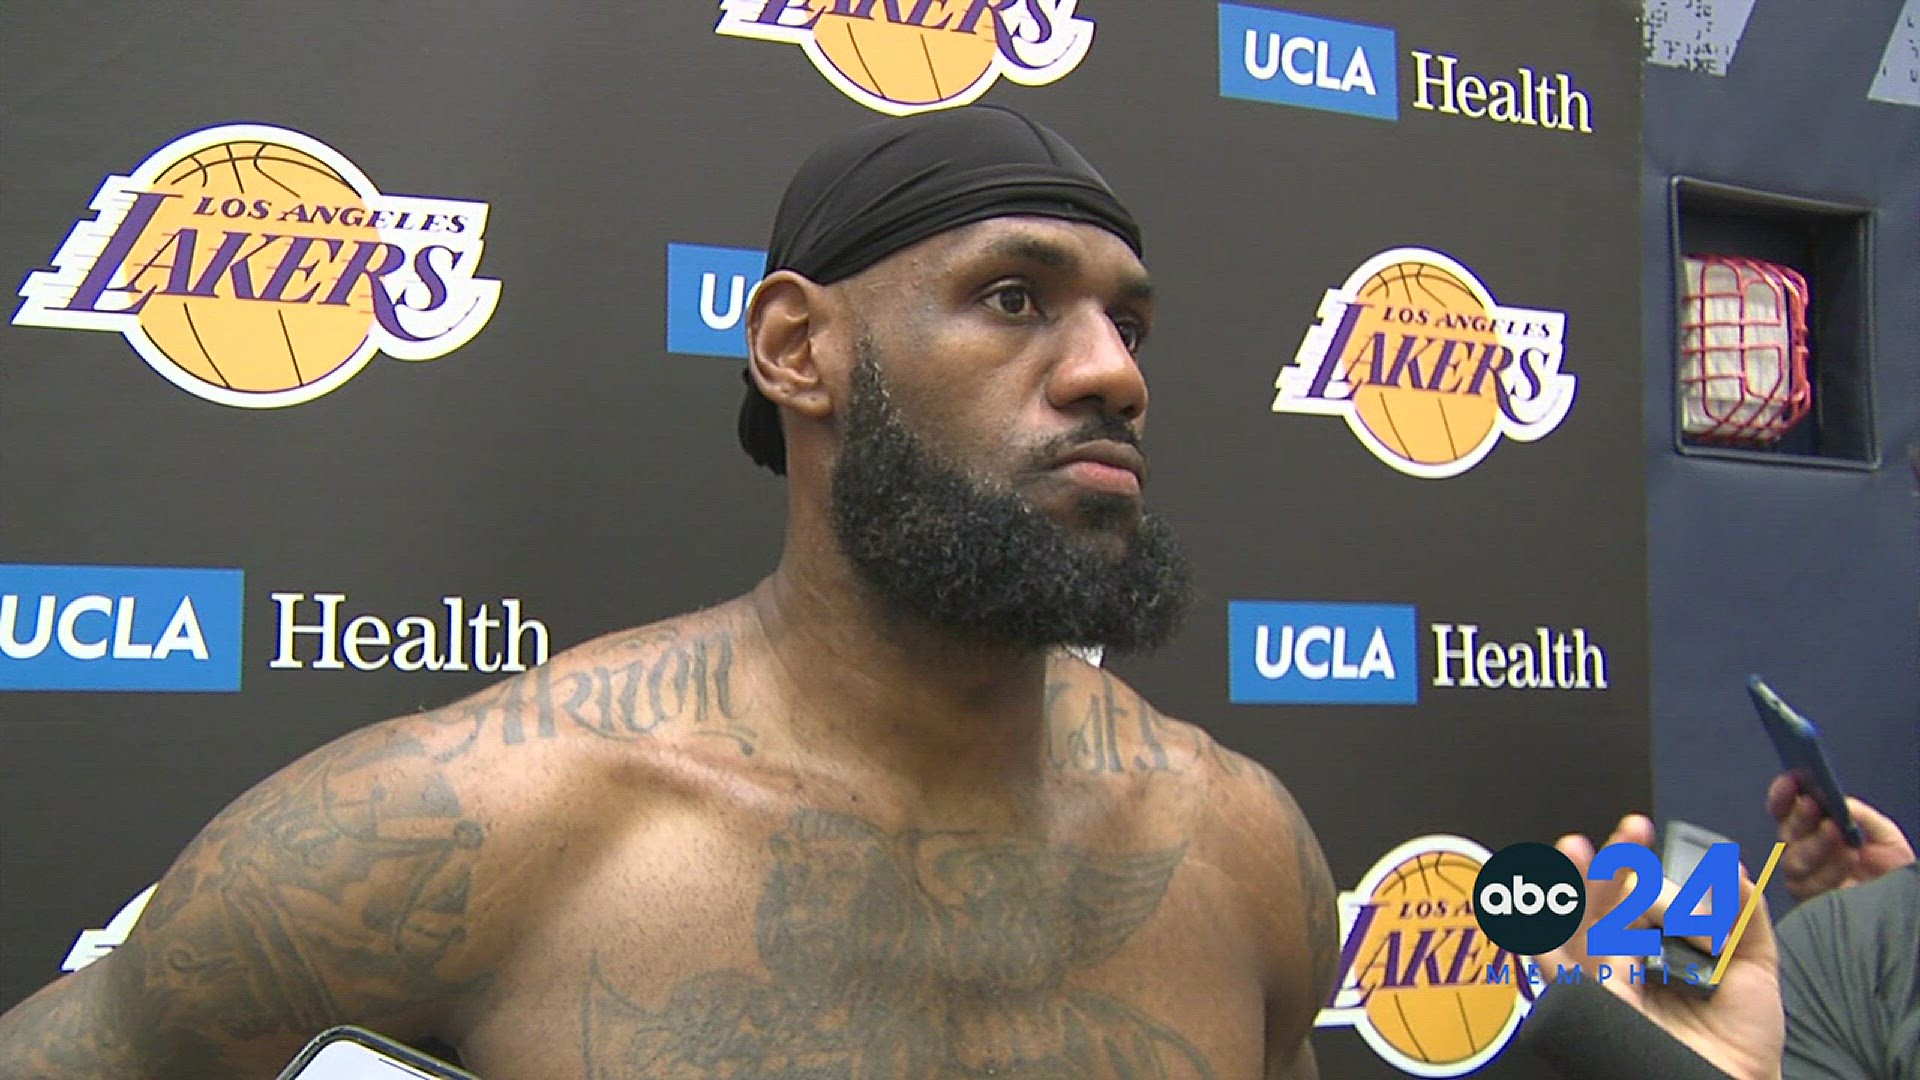 James met with reporters Saturday ahead of Game One, which tips off Sunday at 2:00pm on ABC24